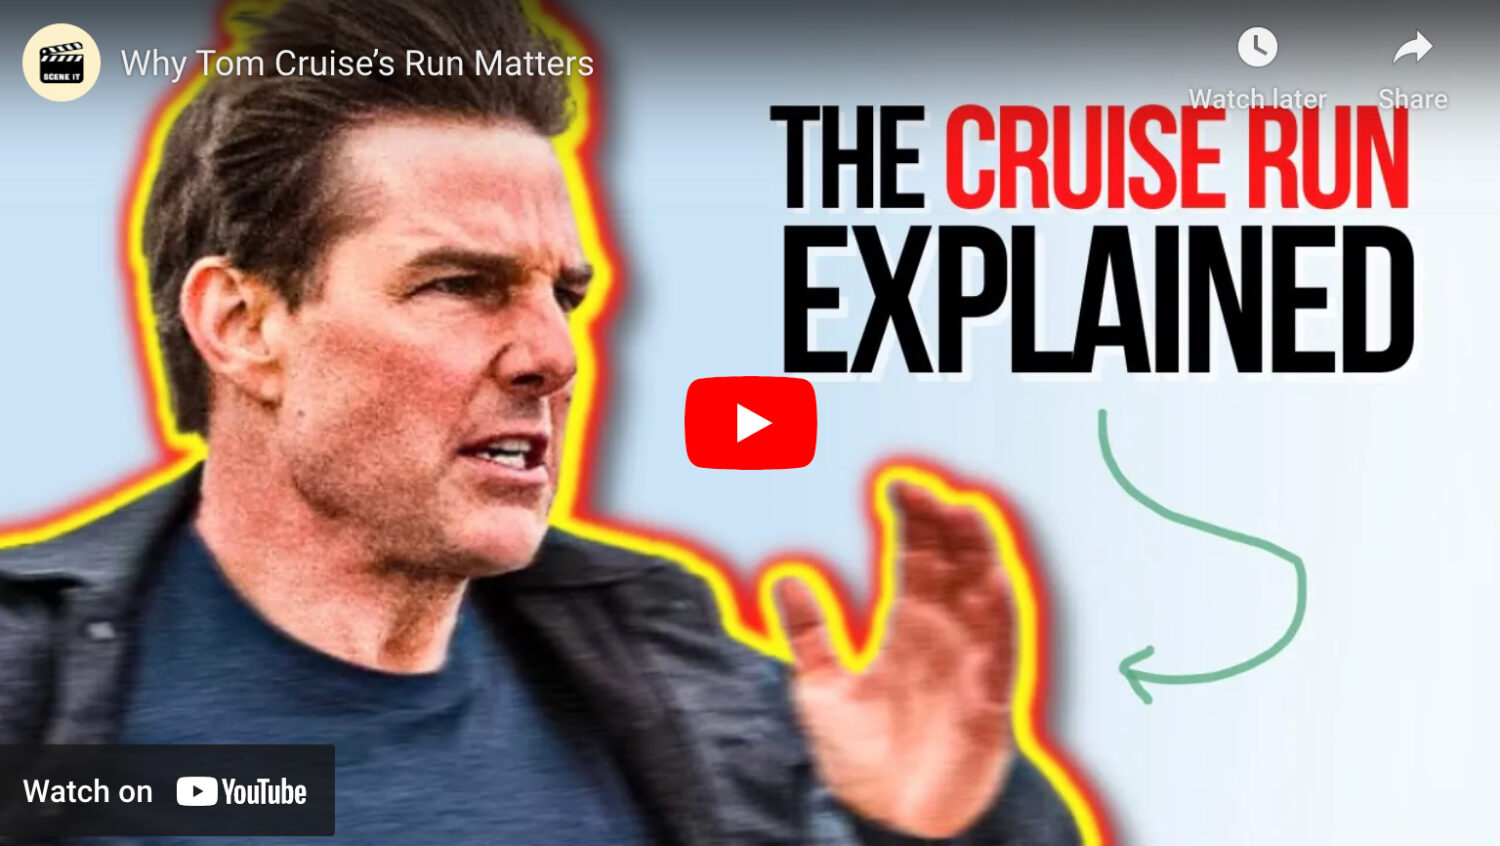 screen capture from Why Tom Cruise's Run Matters